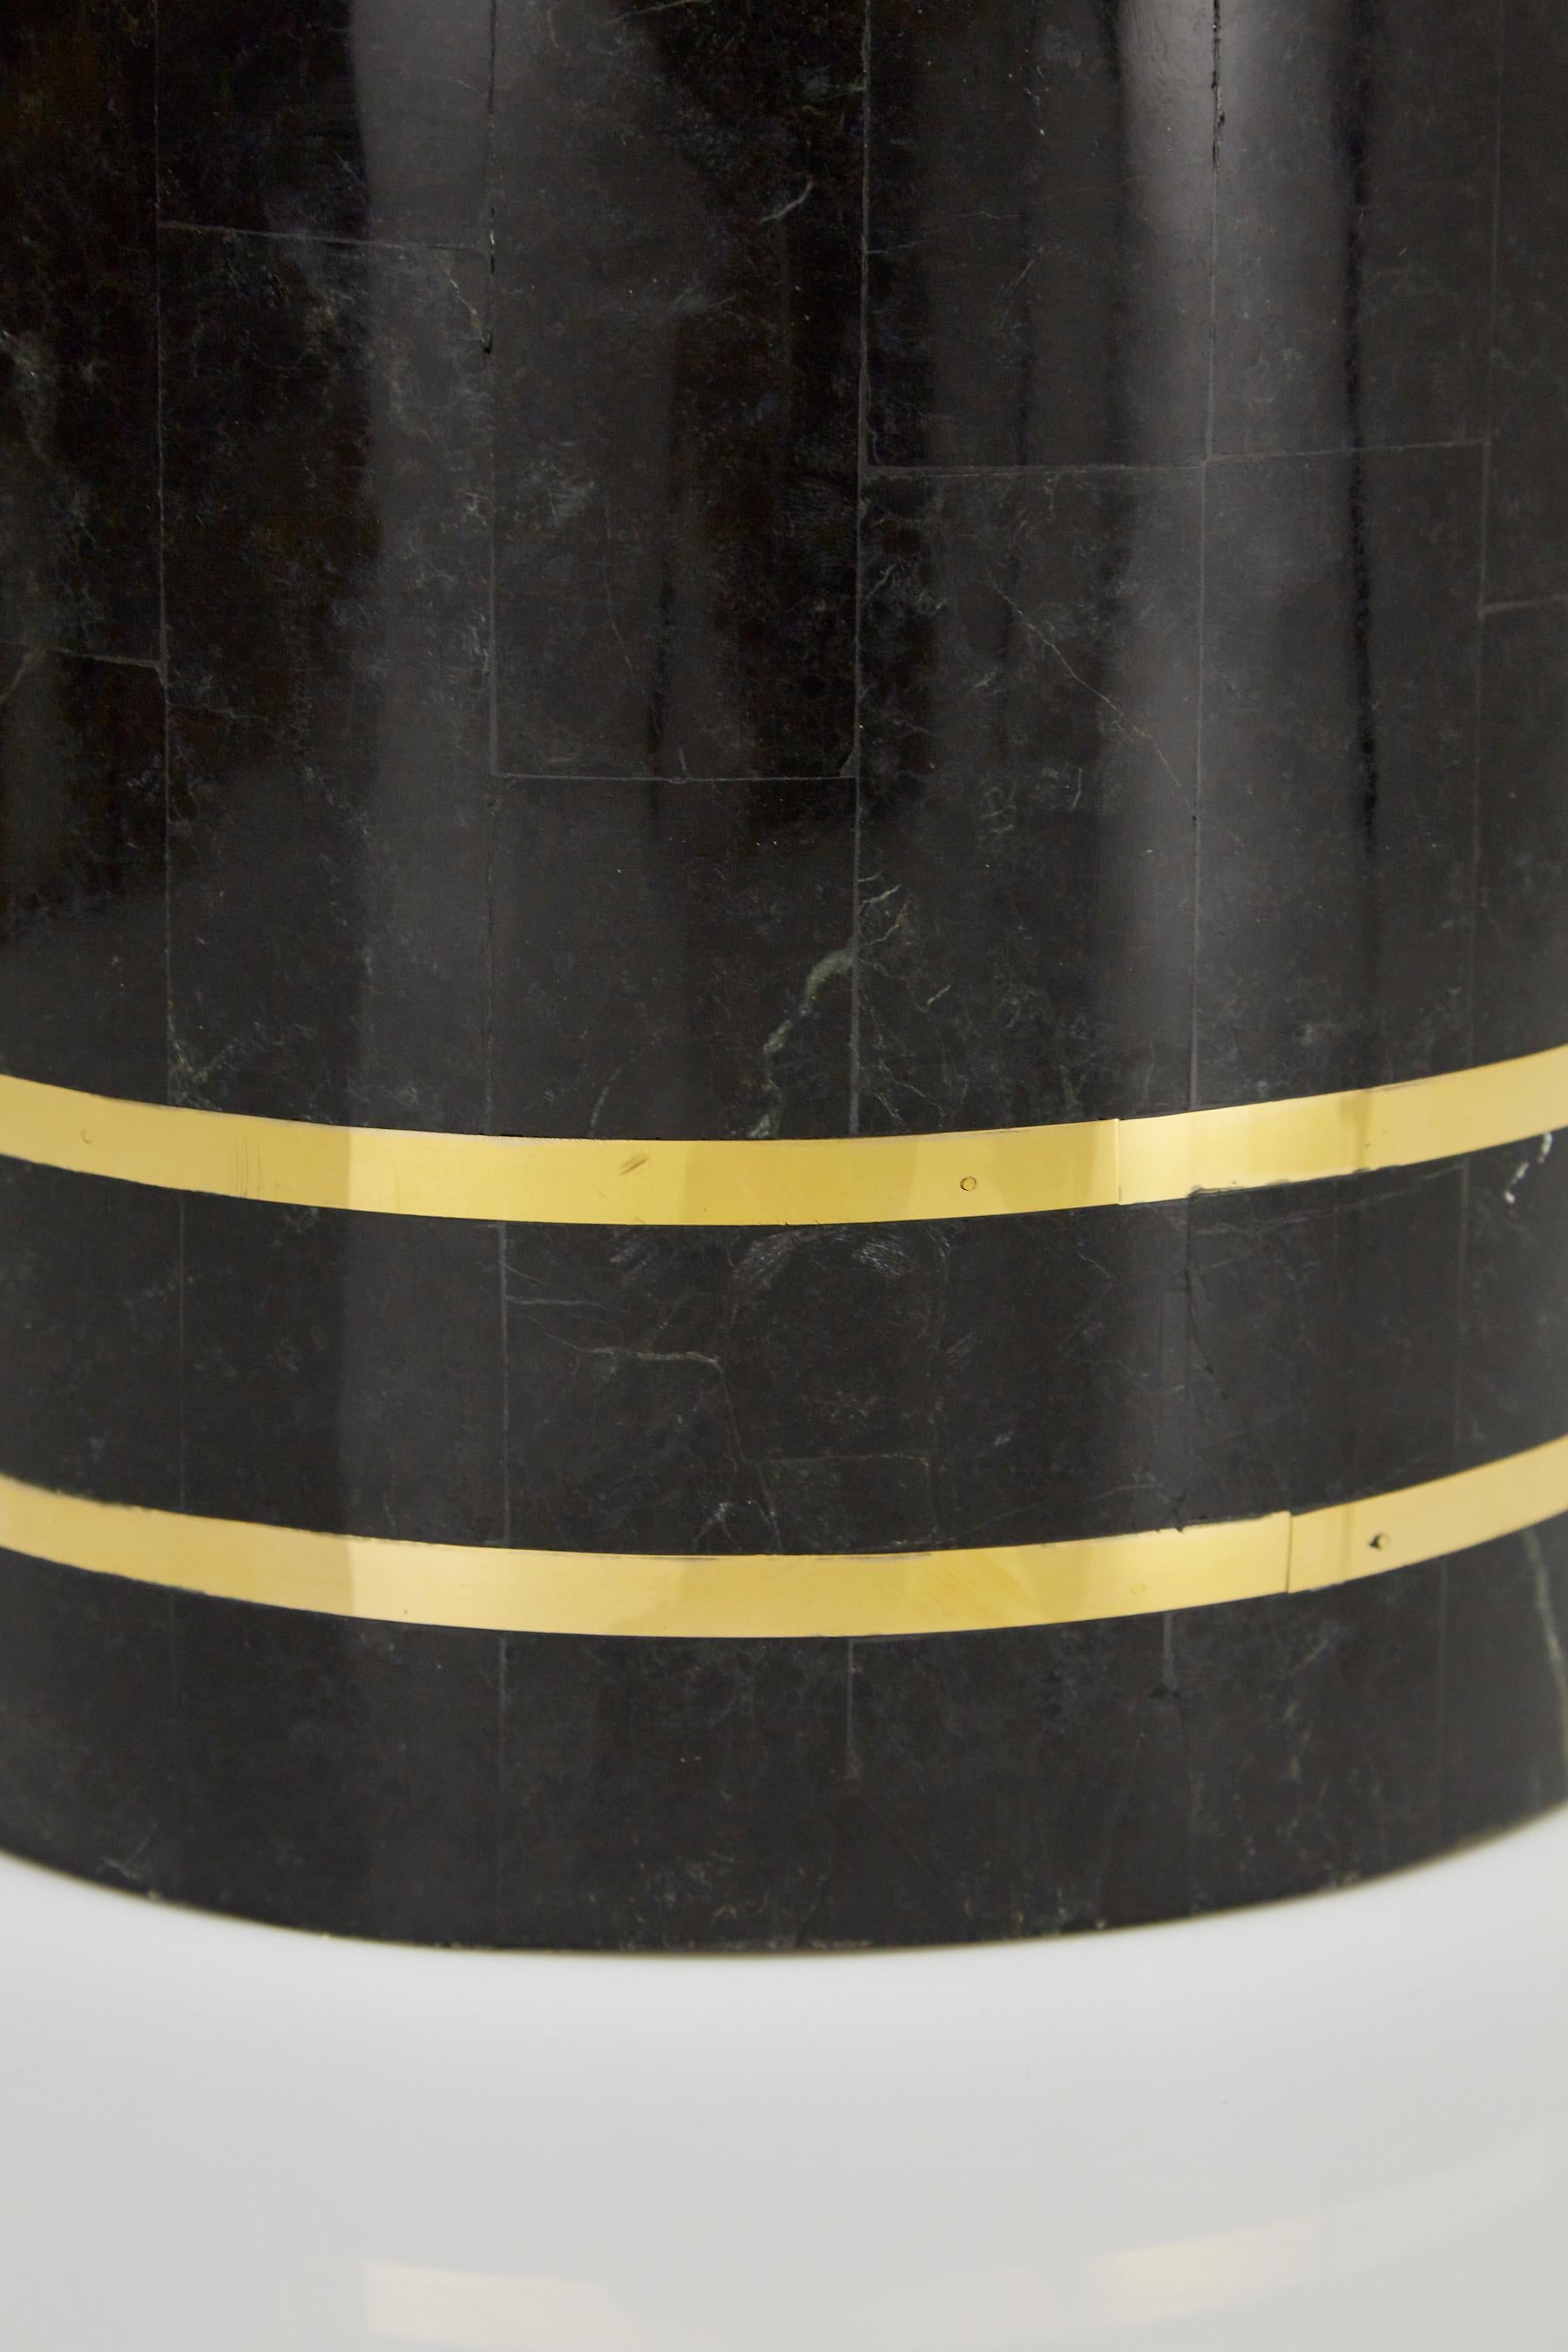 Philippine Small Round Tessellated Black Stone Planter with Brass Detailing, 1980s